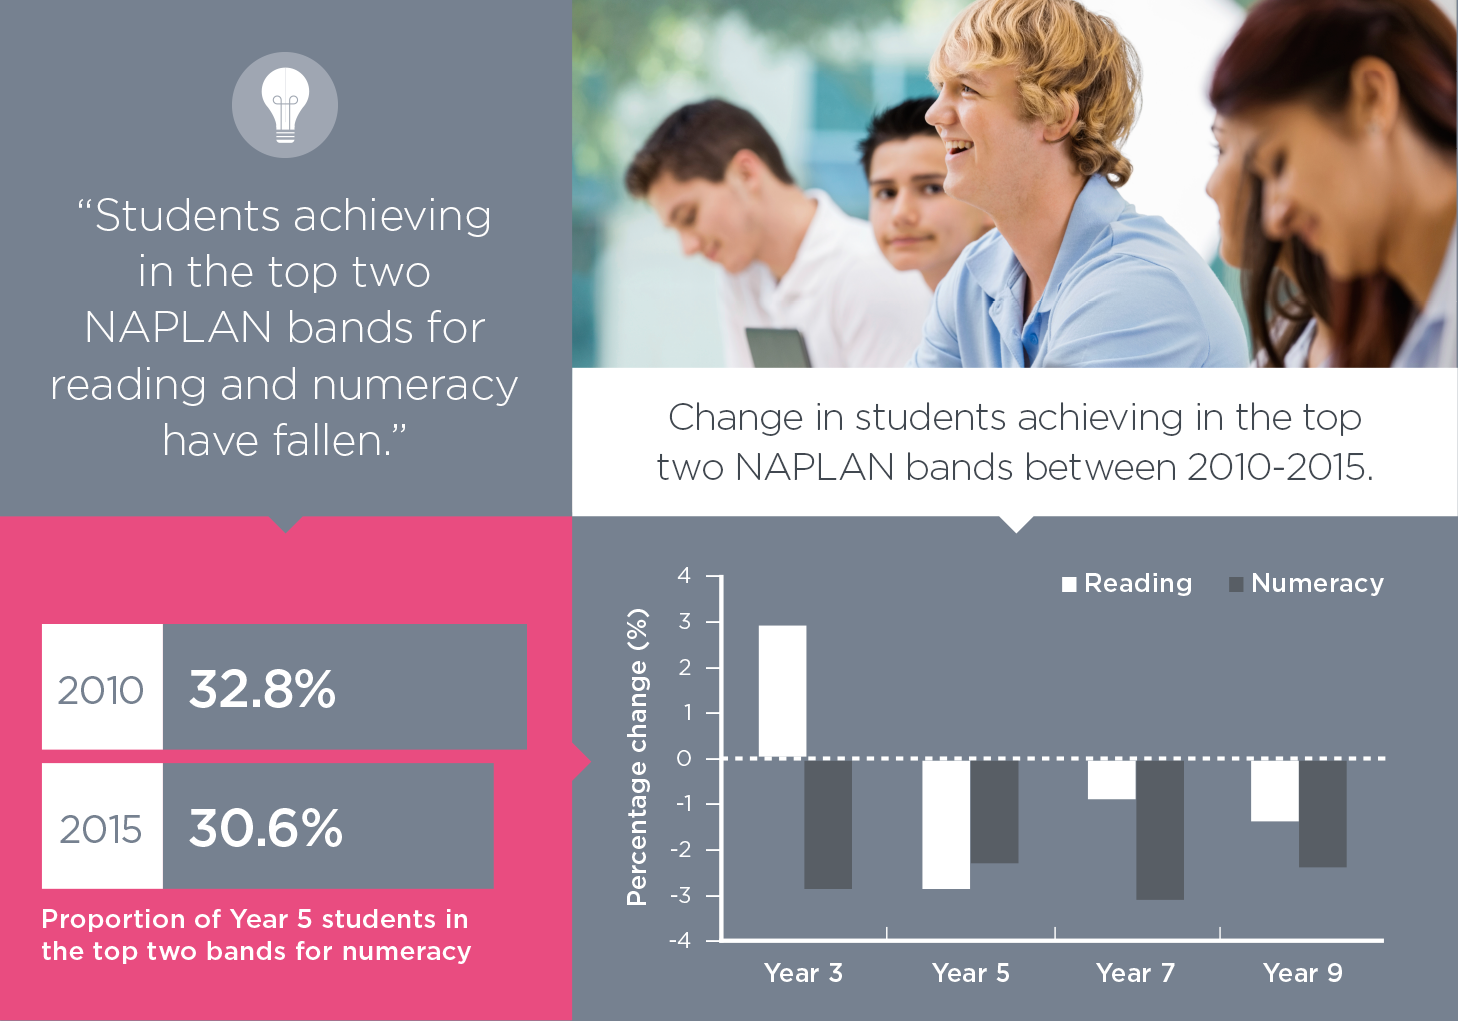 The proportion of Year 5 students in the top two bands for numeracy fell from 32.8 per cent in 2010 to 30.6 per cent in 2015.